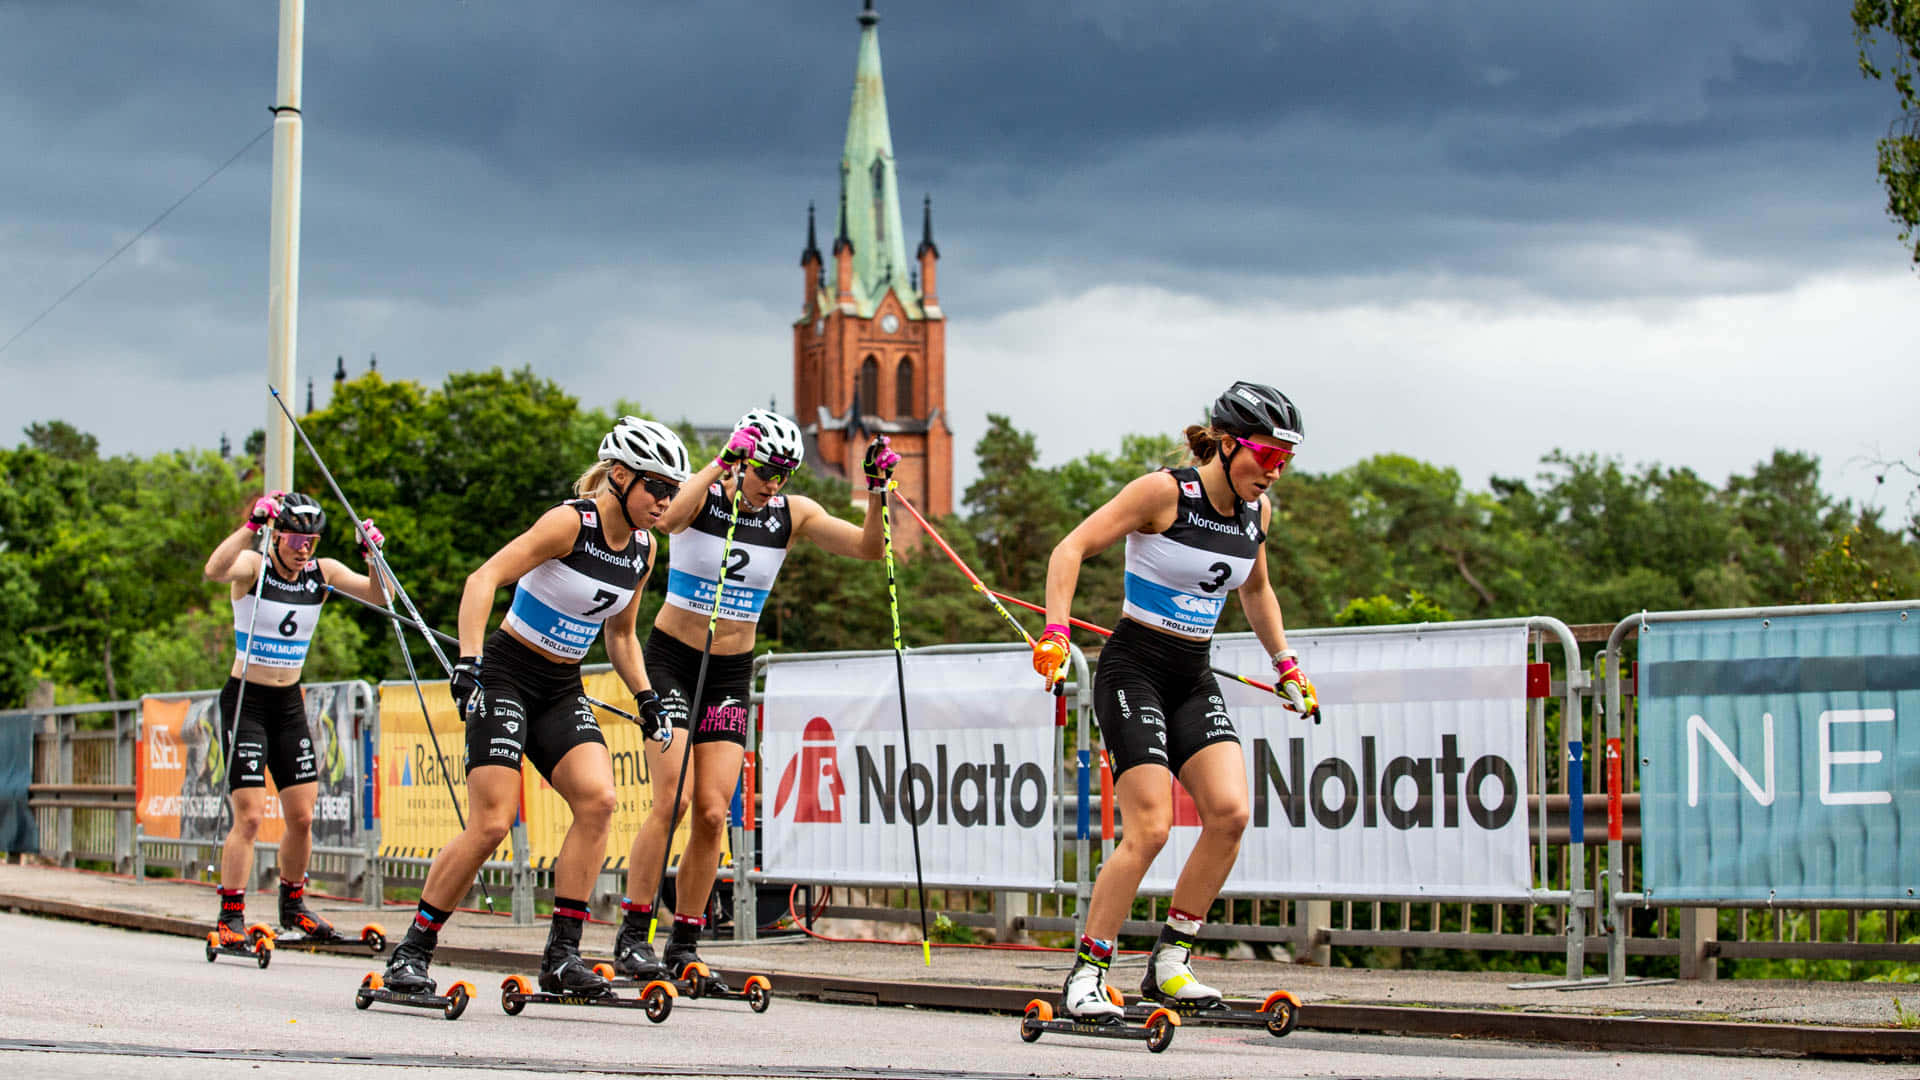 Roller Skiing Competition Trollhattan Wallpaper